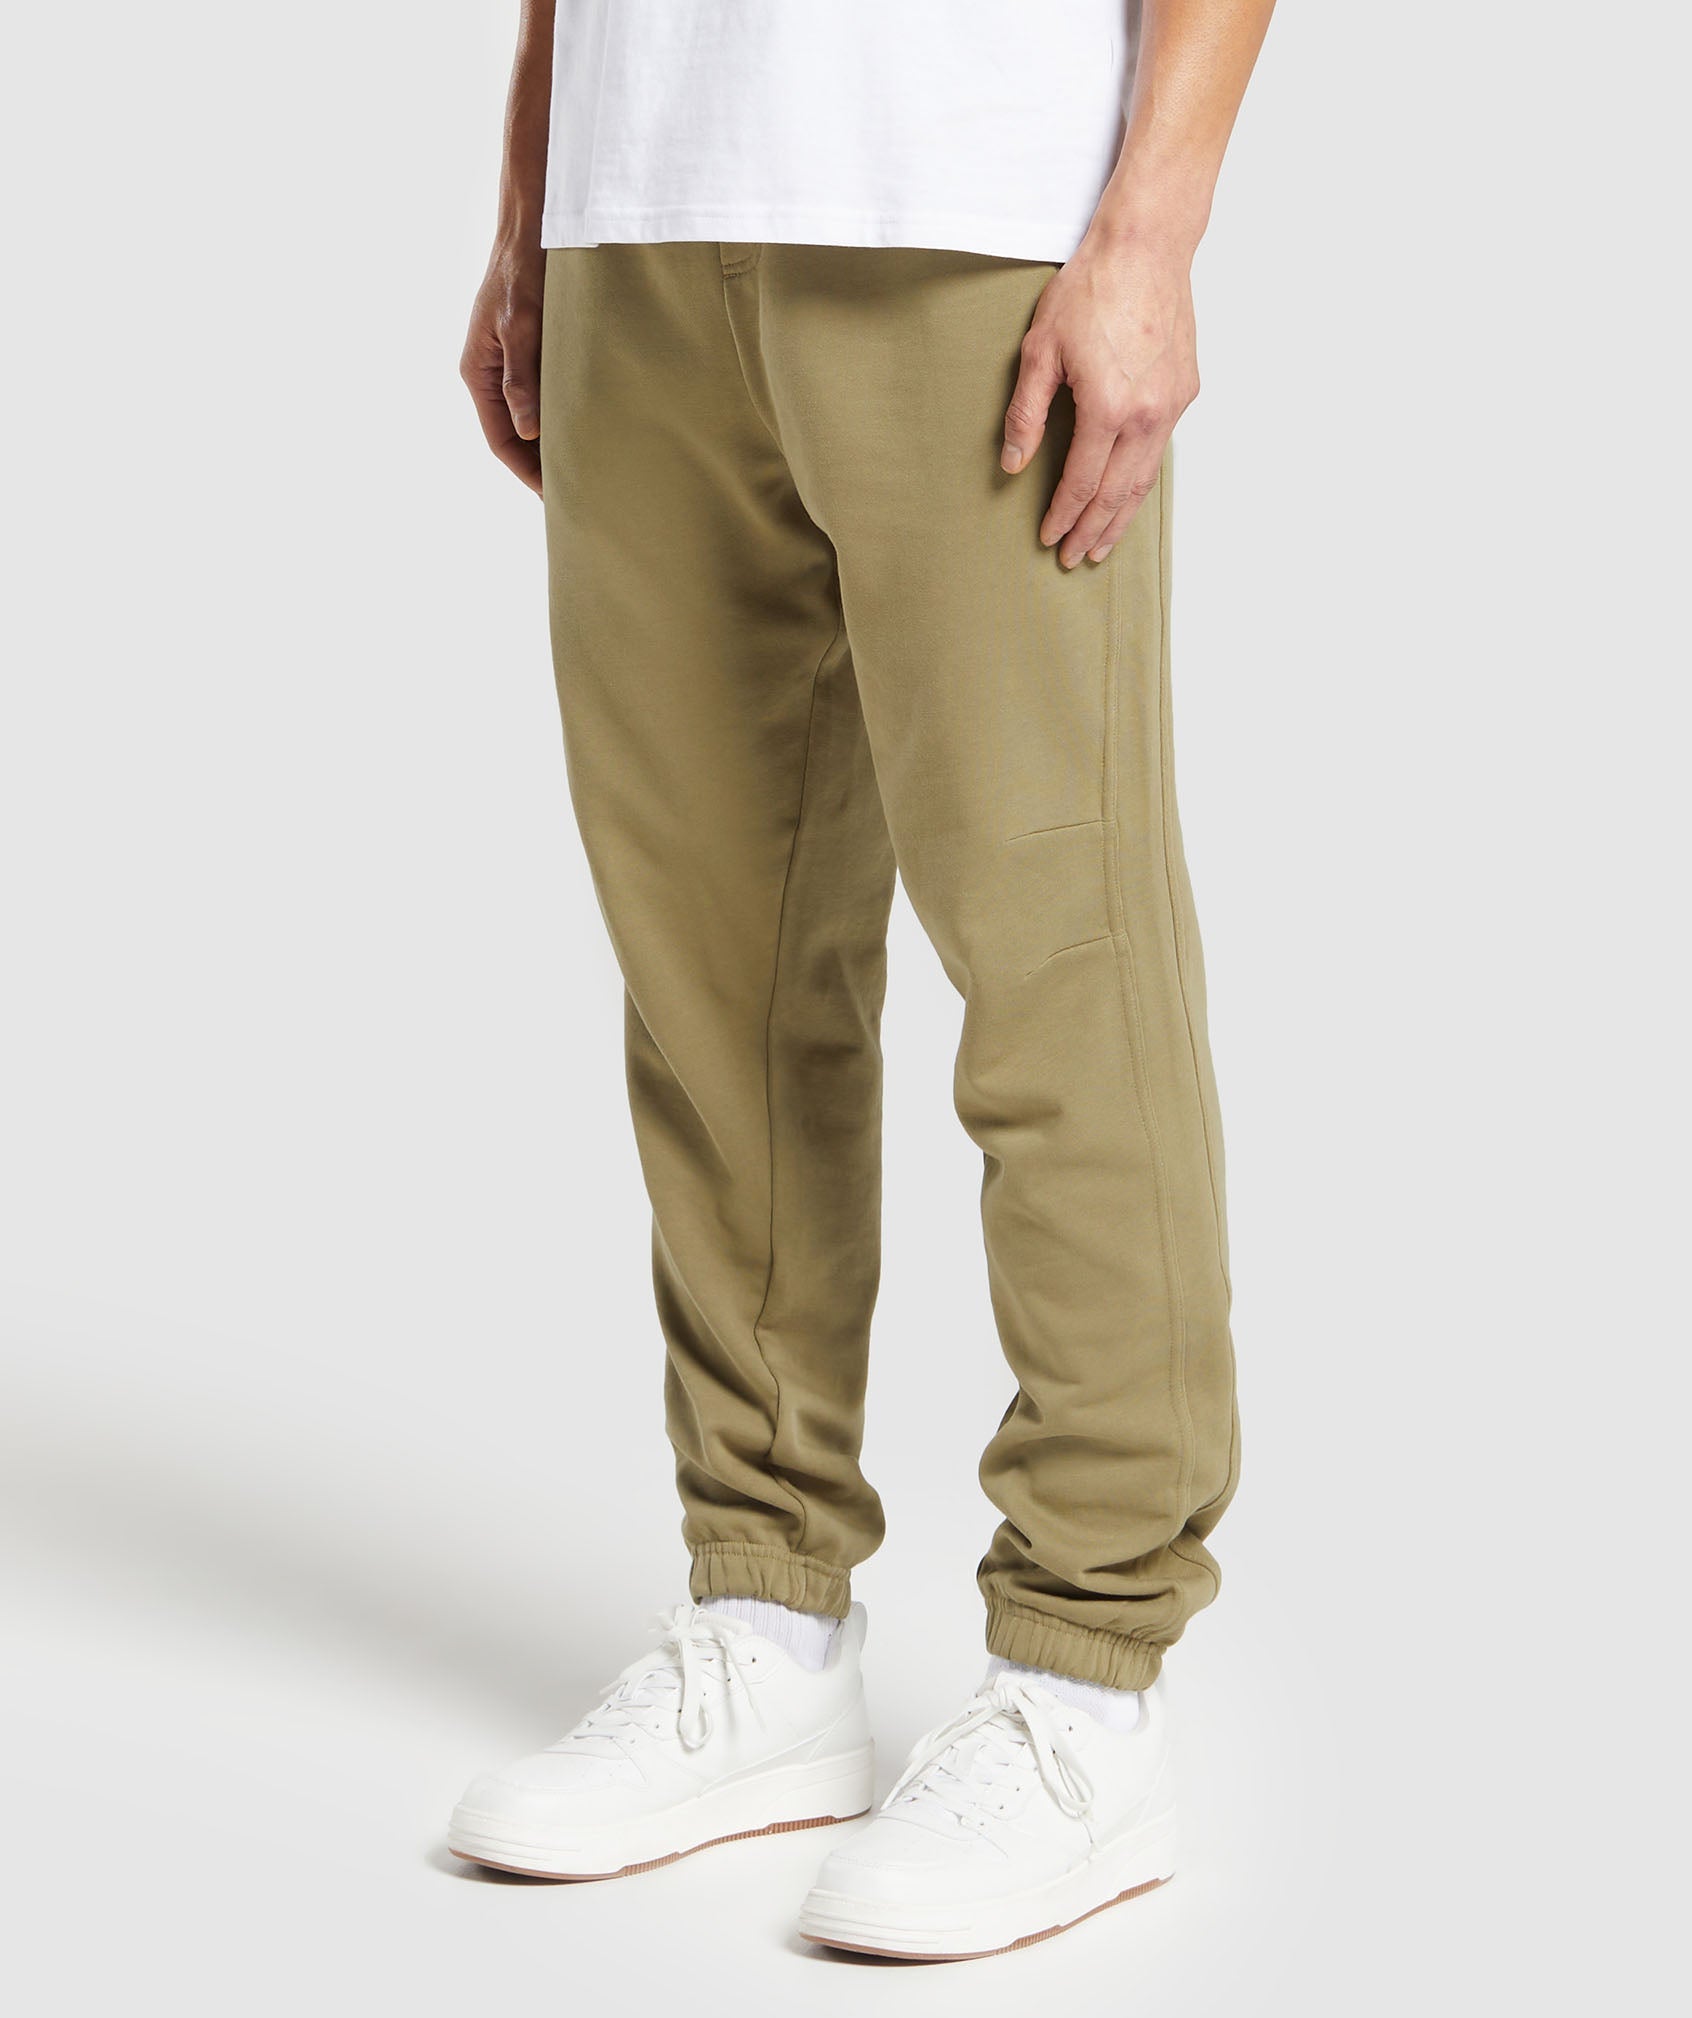 Rest Day Essentials Joggers in Troop Green - view 3